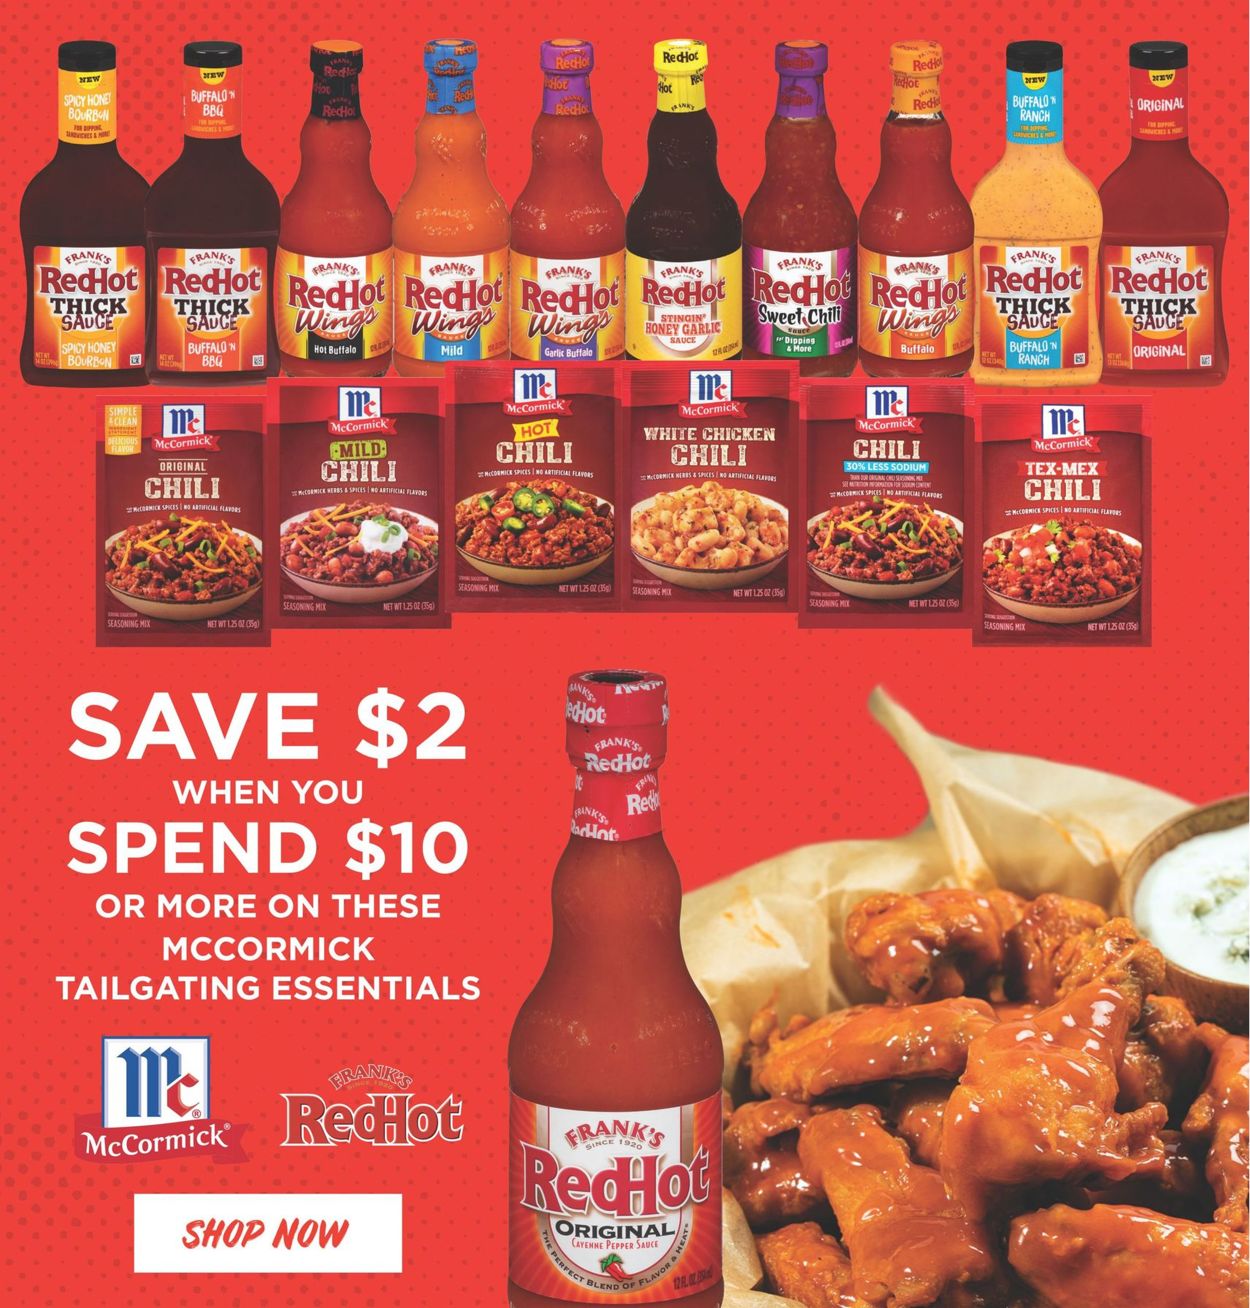 Lowes Foods Ad from 09/08/2021